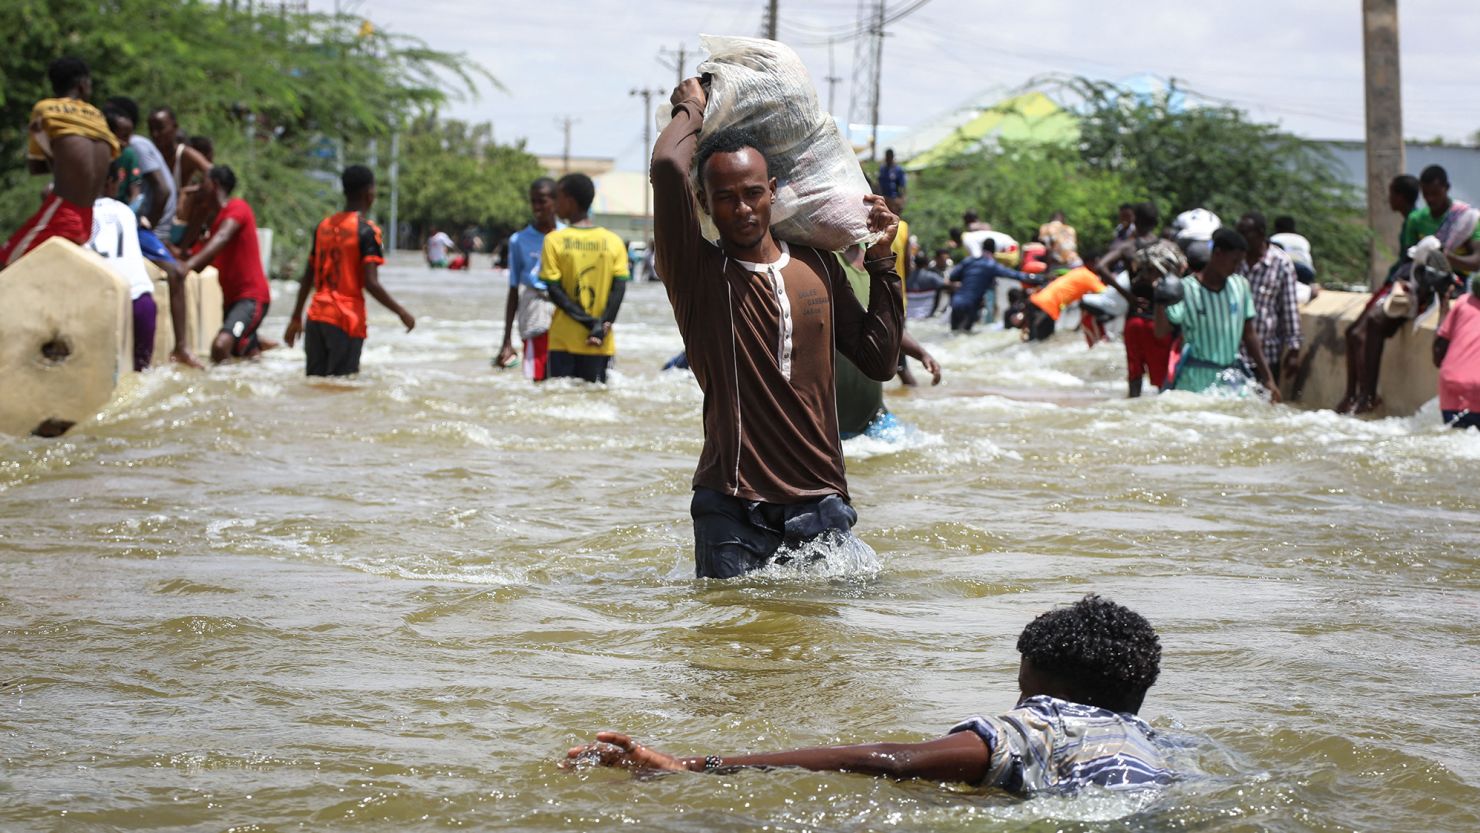 A man carries a sack through floodwater in Beledweyne, central Somalia. Flash flooding in central Somalia has killed 22 people and affected over 450,000, the UN's humanitarian agency OCHA said. 